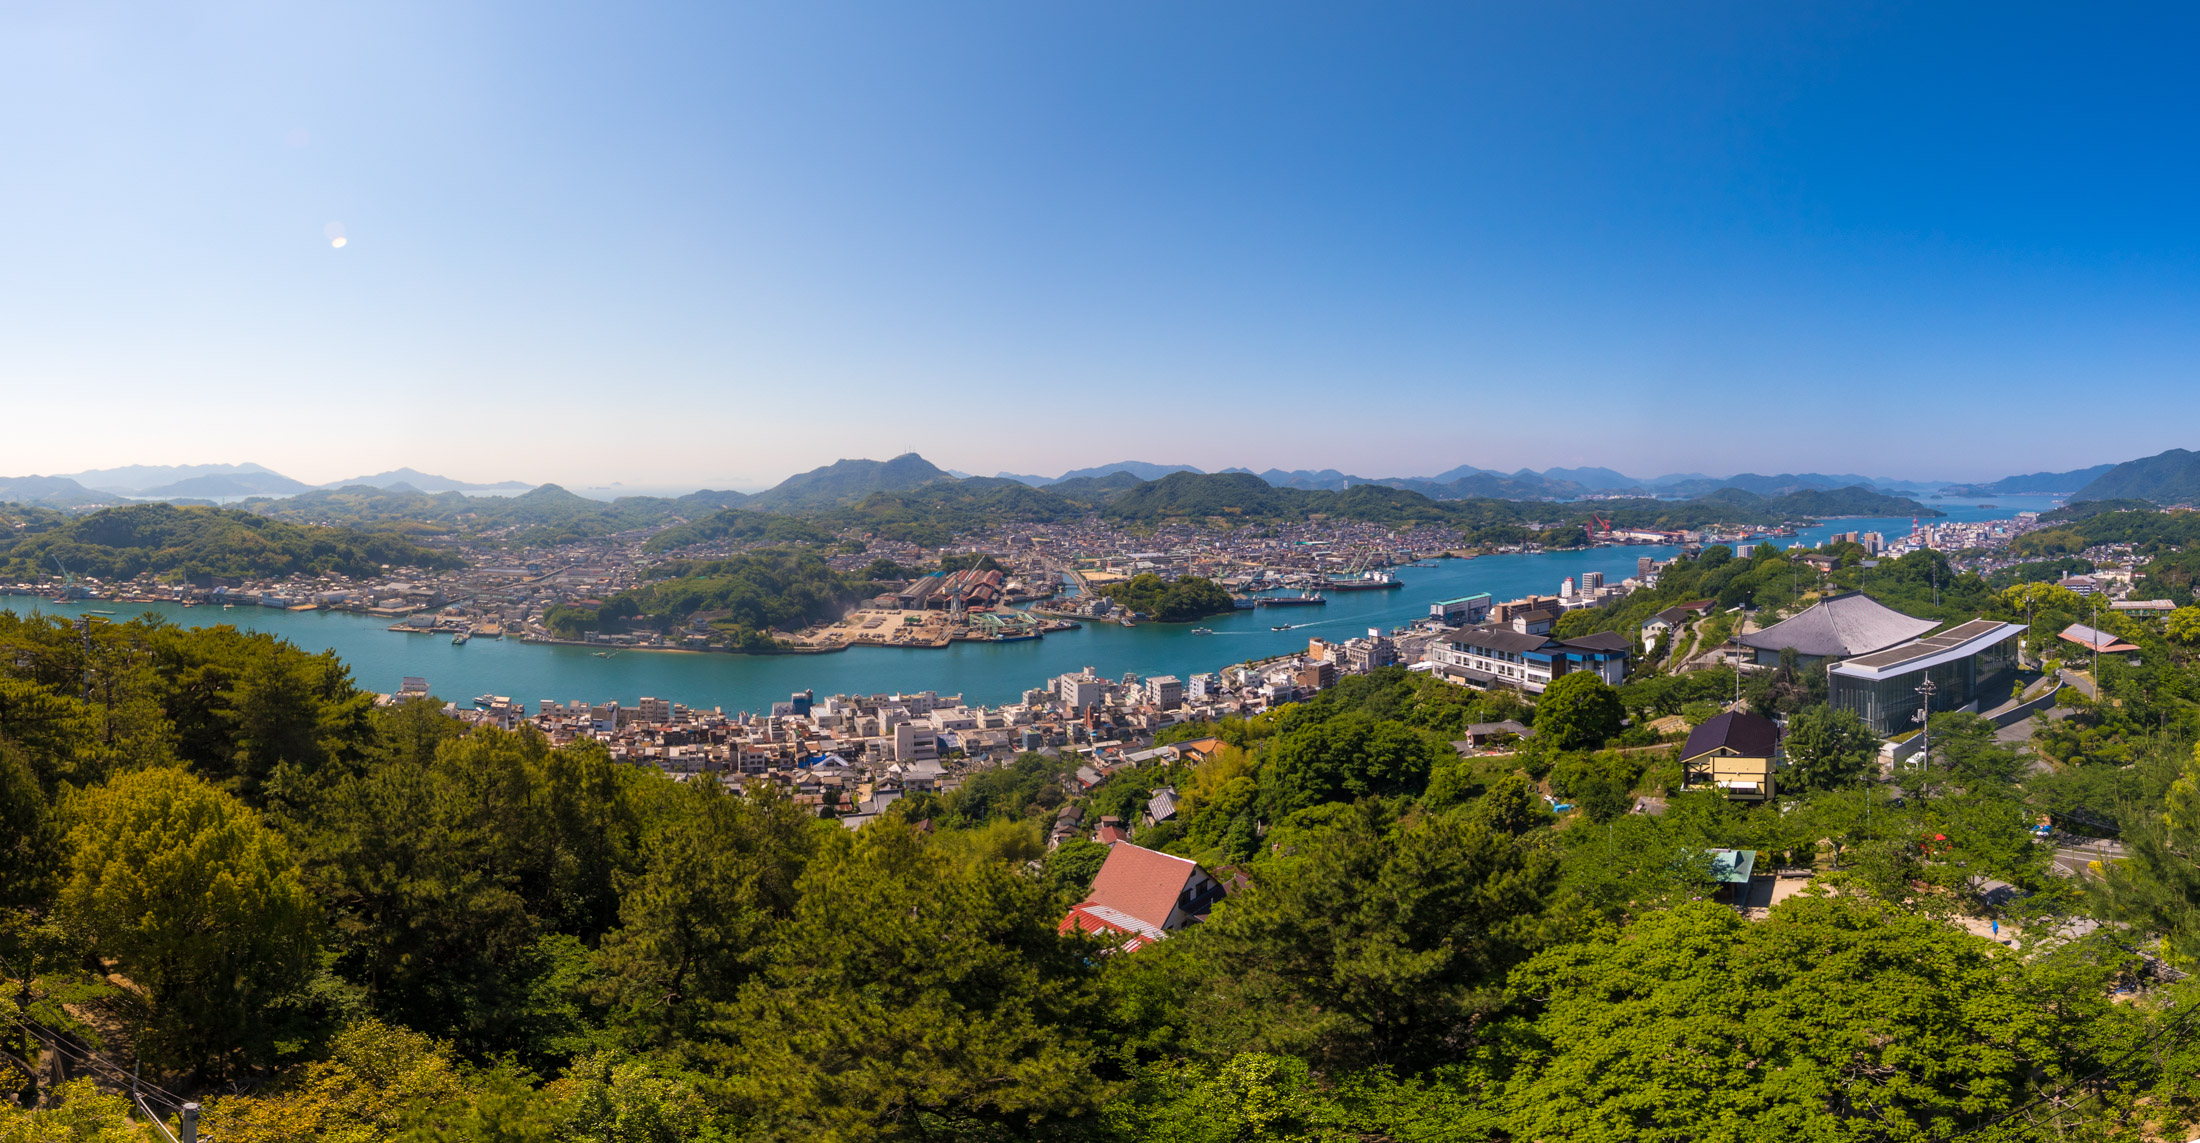 Onomichi: Coastal City with Ancient Temples, Mountains